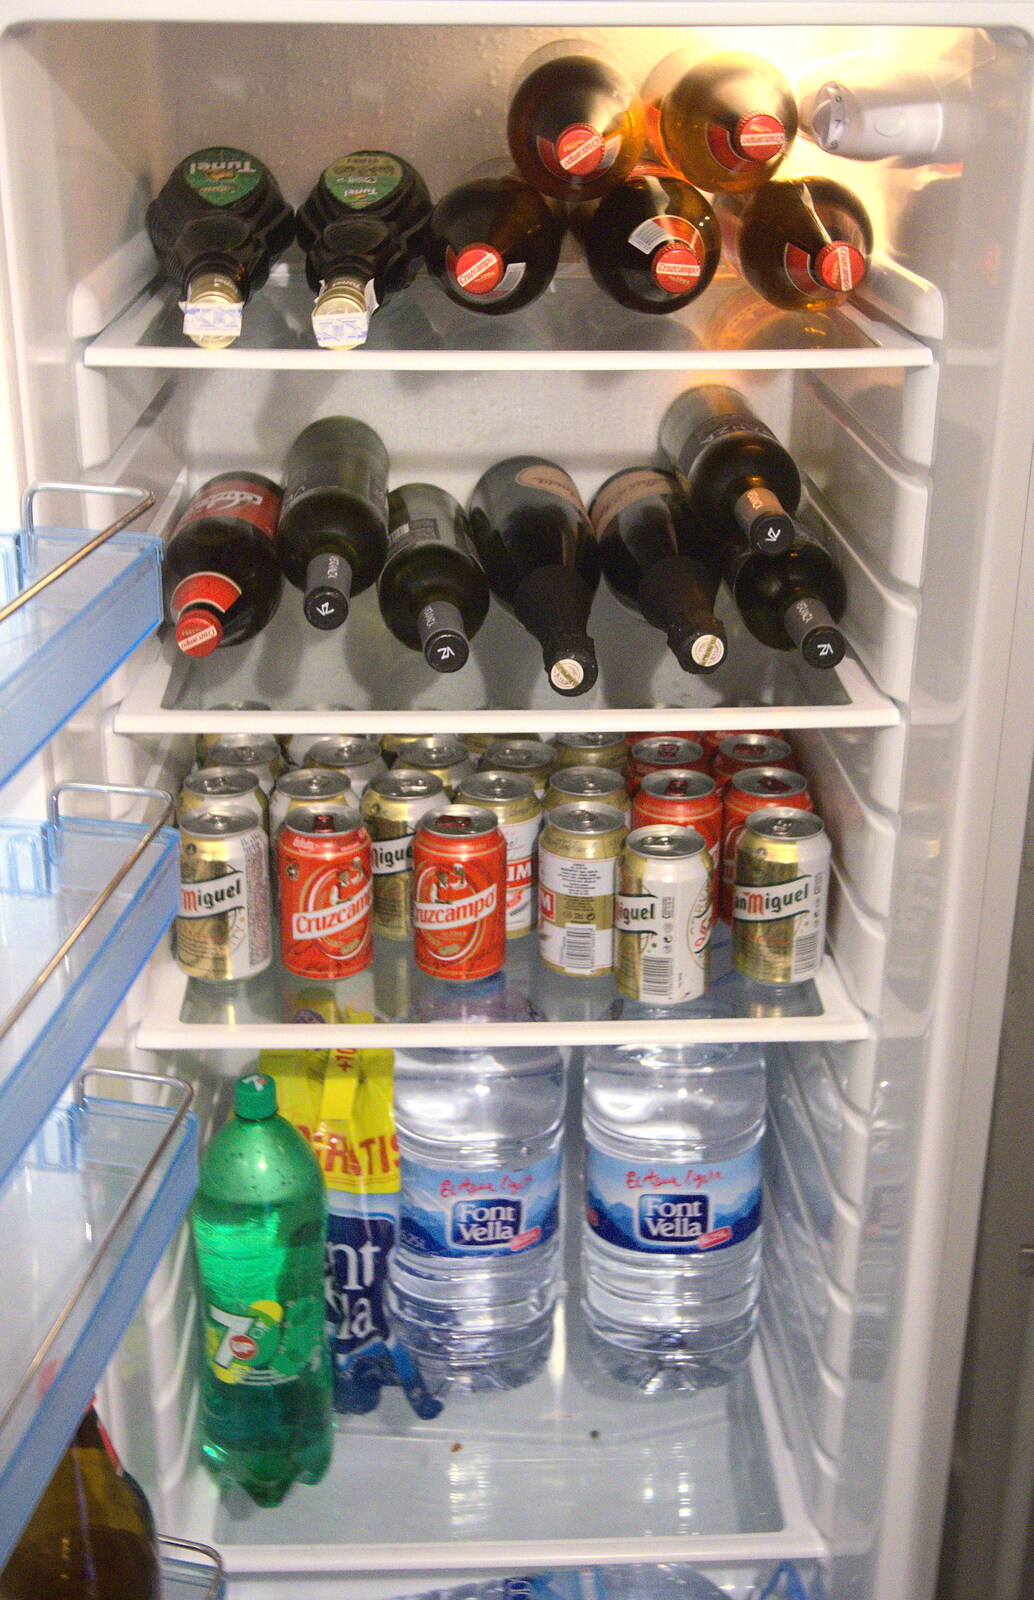 The fridge gets ready for the week ahead from A Trip to Sóller, Mallorca, Spain - 8th-14th September 2012